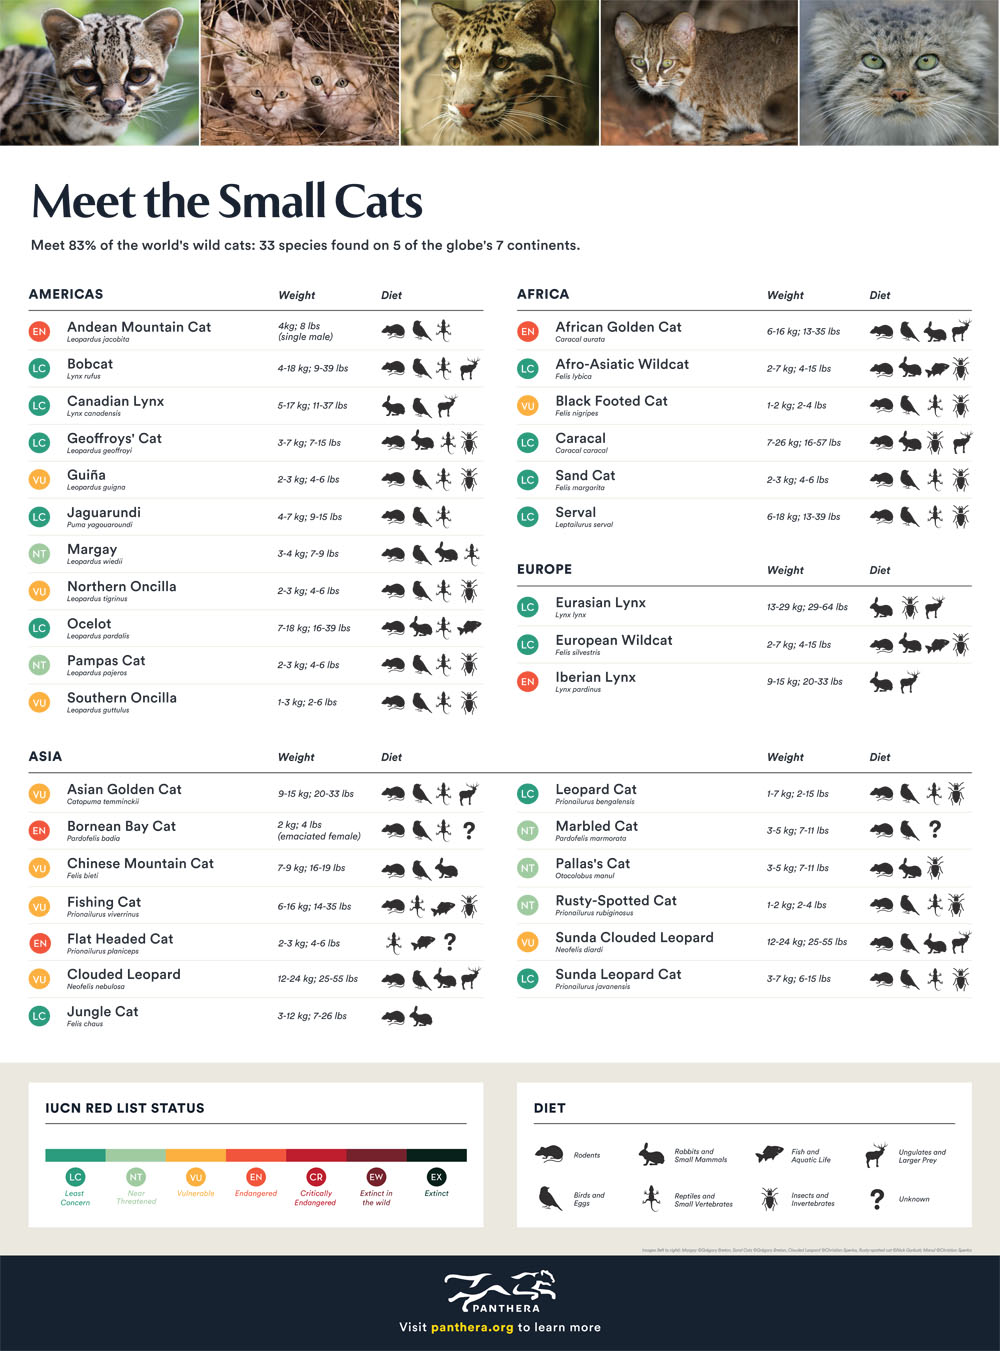 Meet the Small Cats Infographic